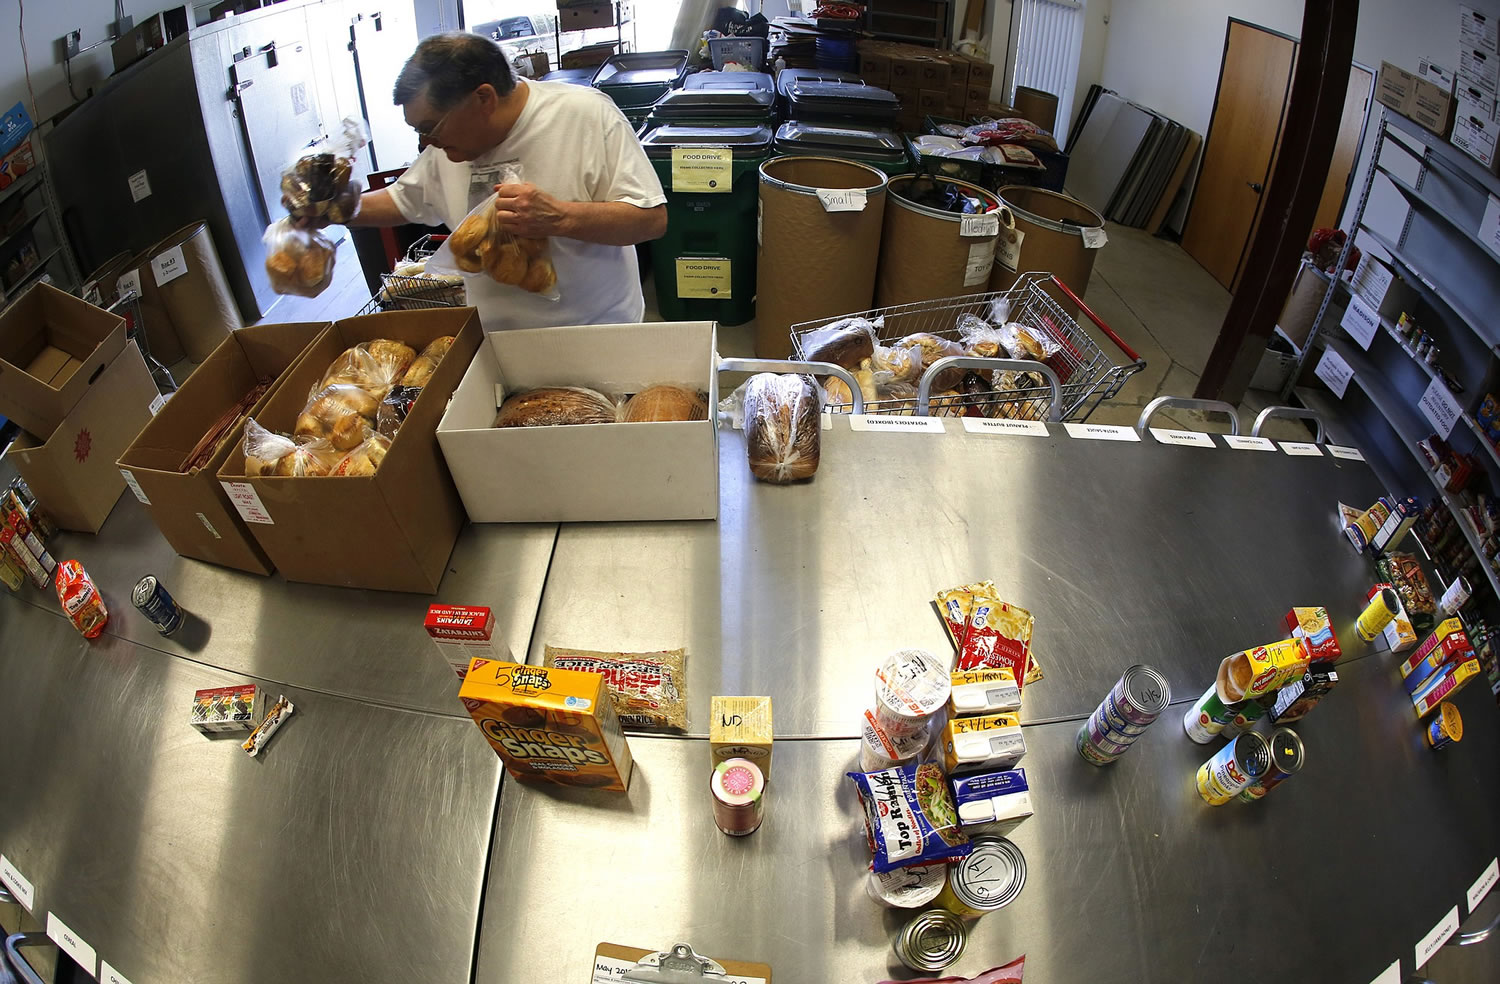 Volunteer Martin Shellabarger sorts donated food items at Families Forward'S warehouse-sized pantry in Irvine, Calif.